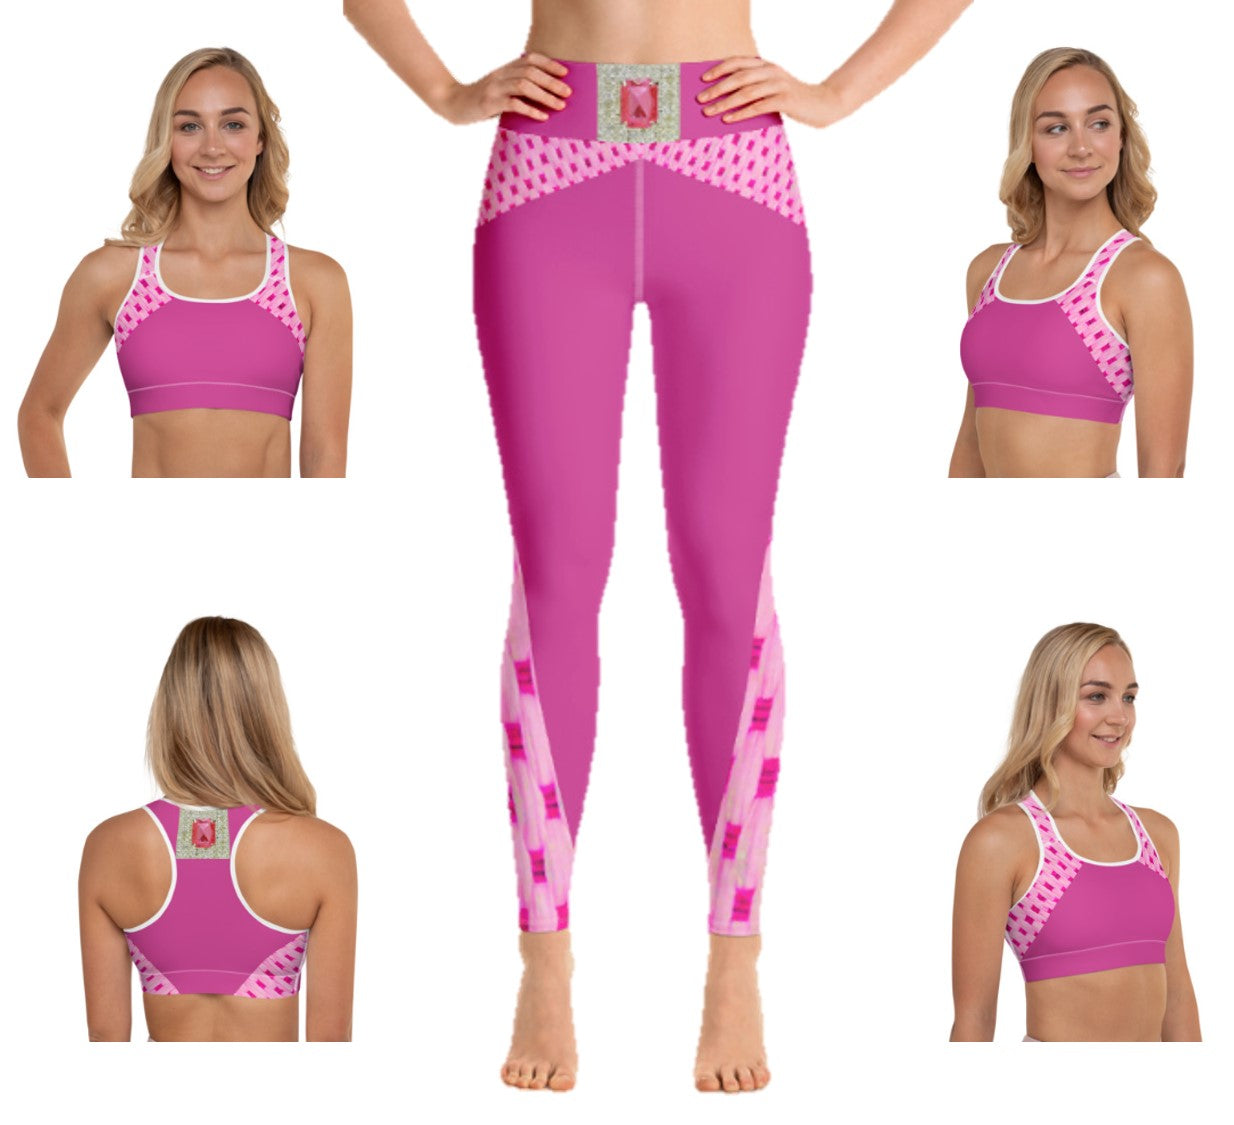 Furycry Epic Crop Top Pink for Women